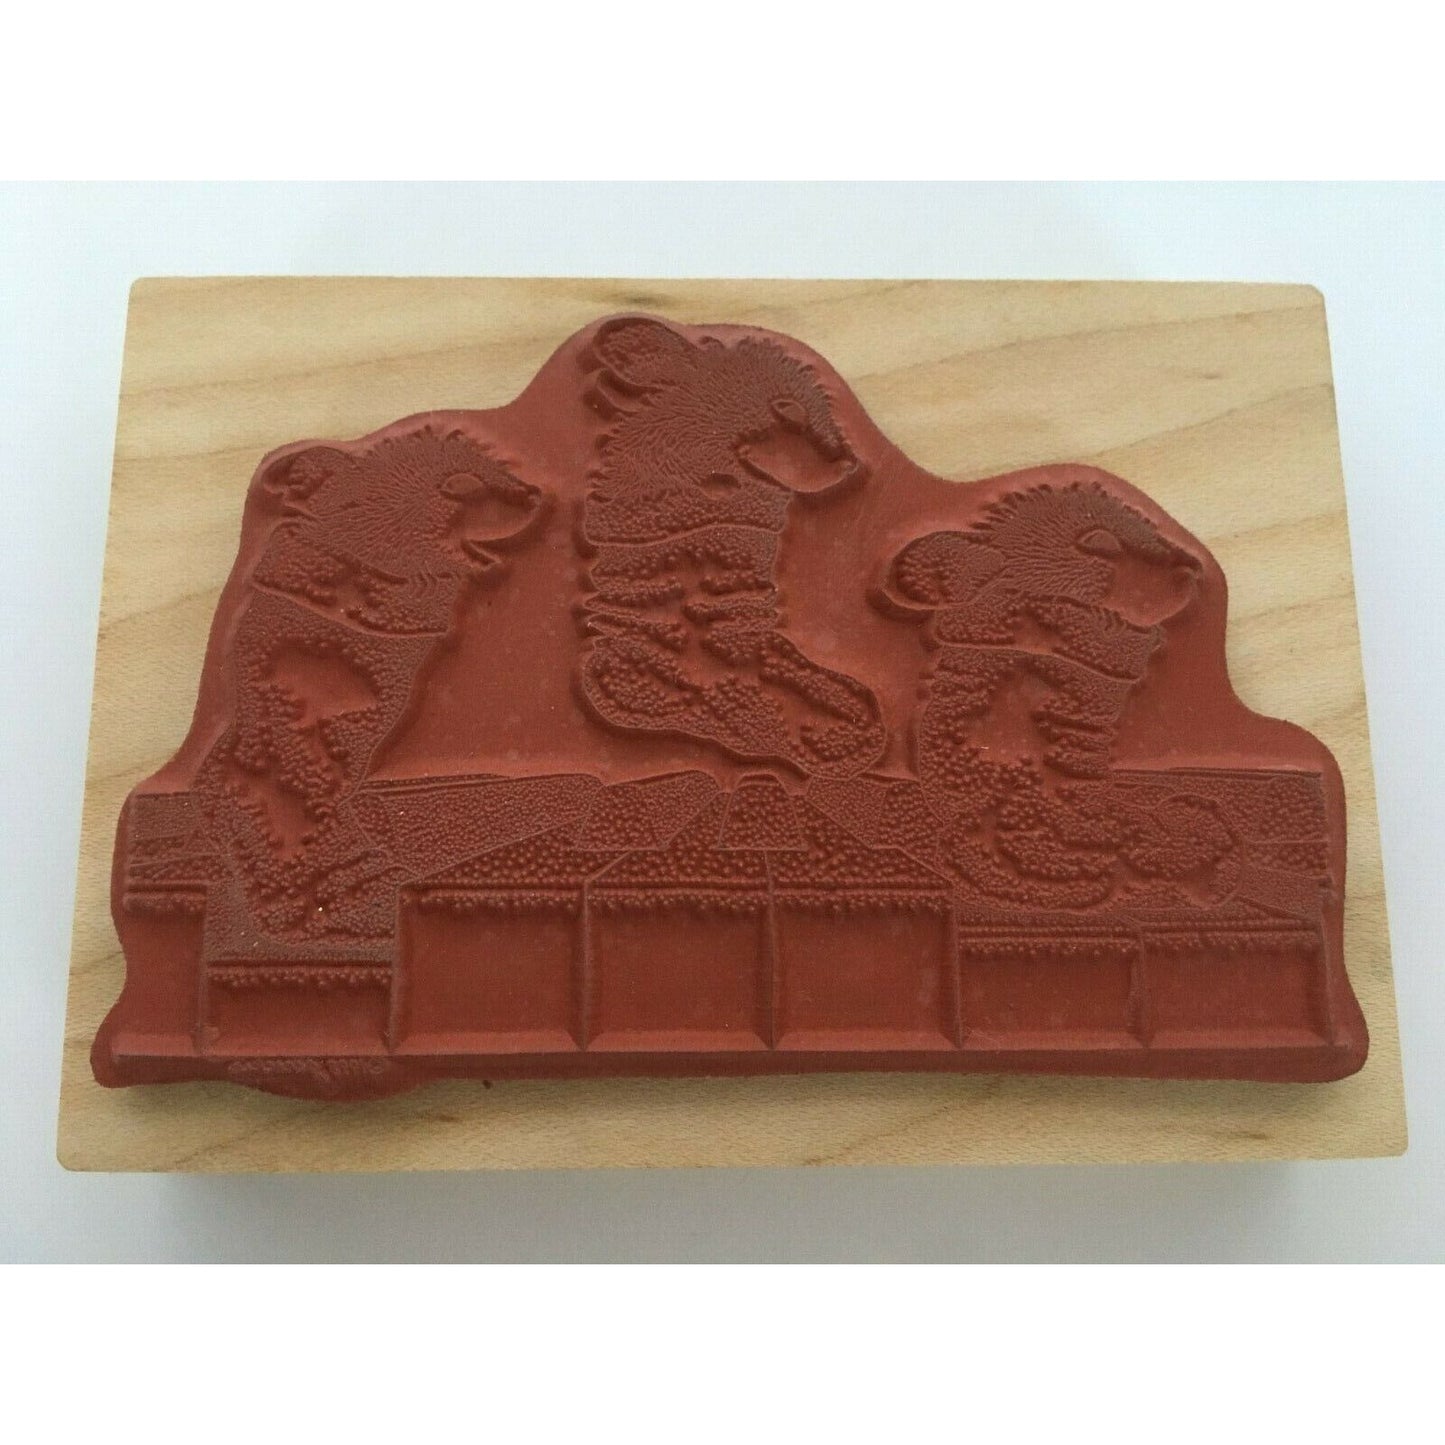 House Mouse Rubber Stamp Sock Hop Amanda Maxwell Mudpie Stocking Christmas Piano